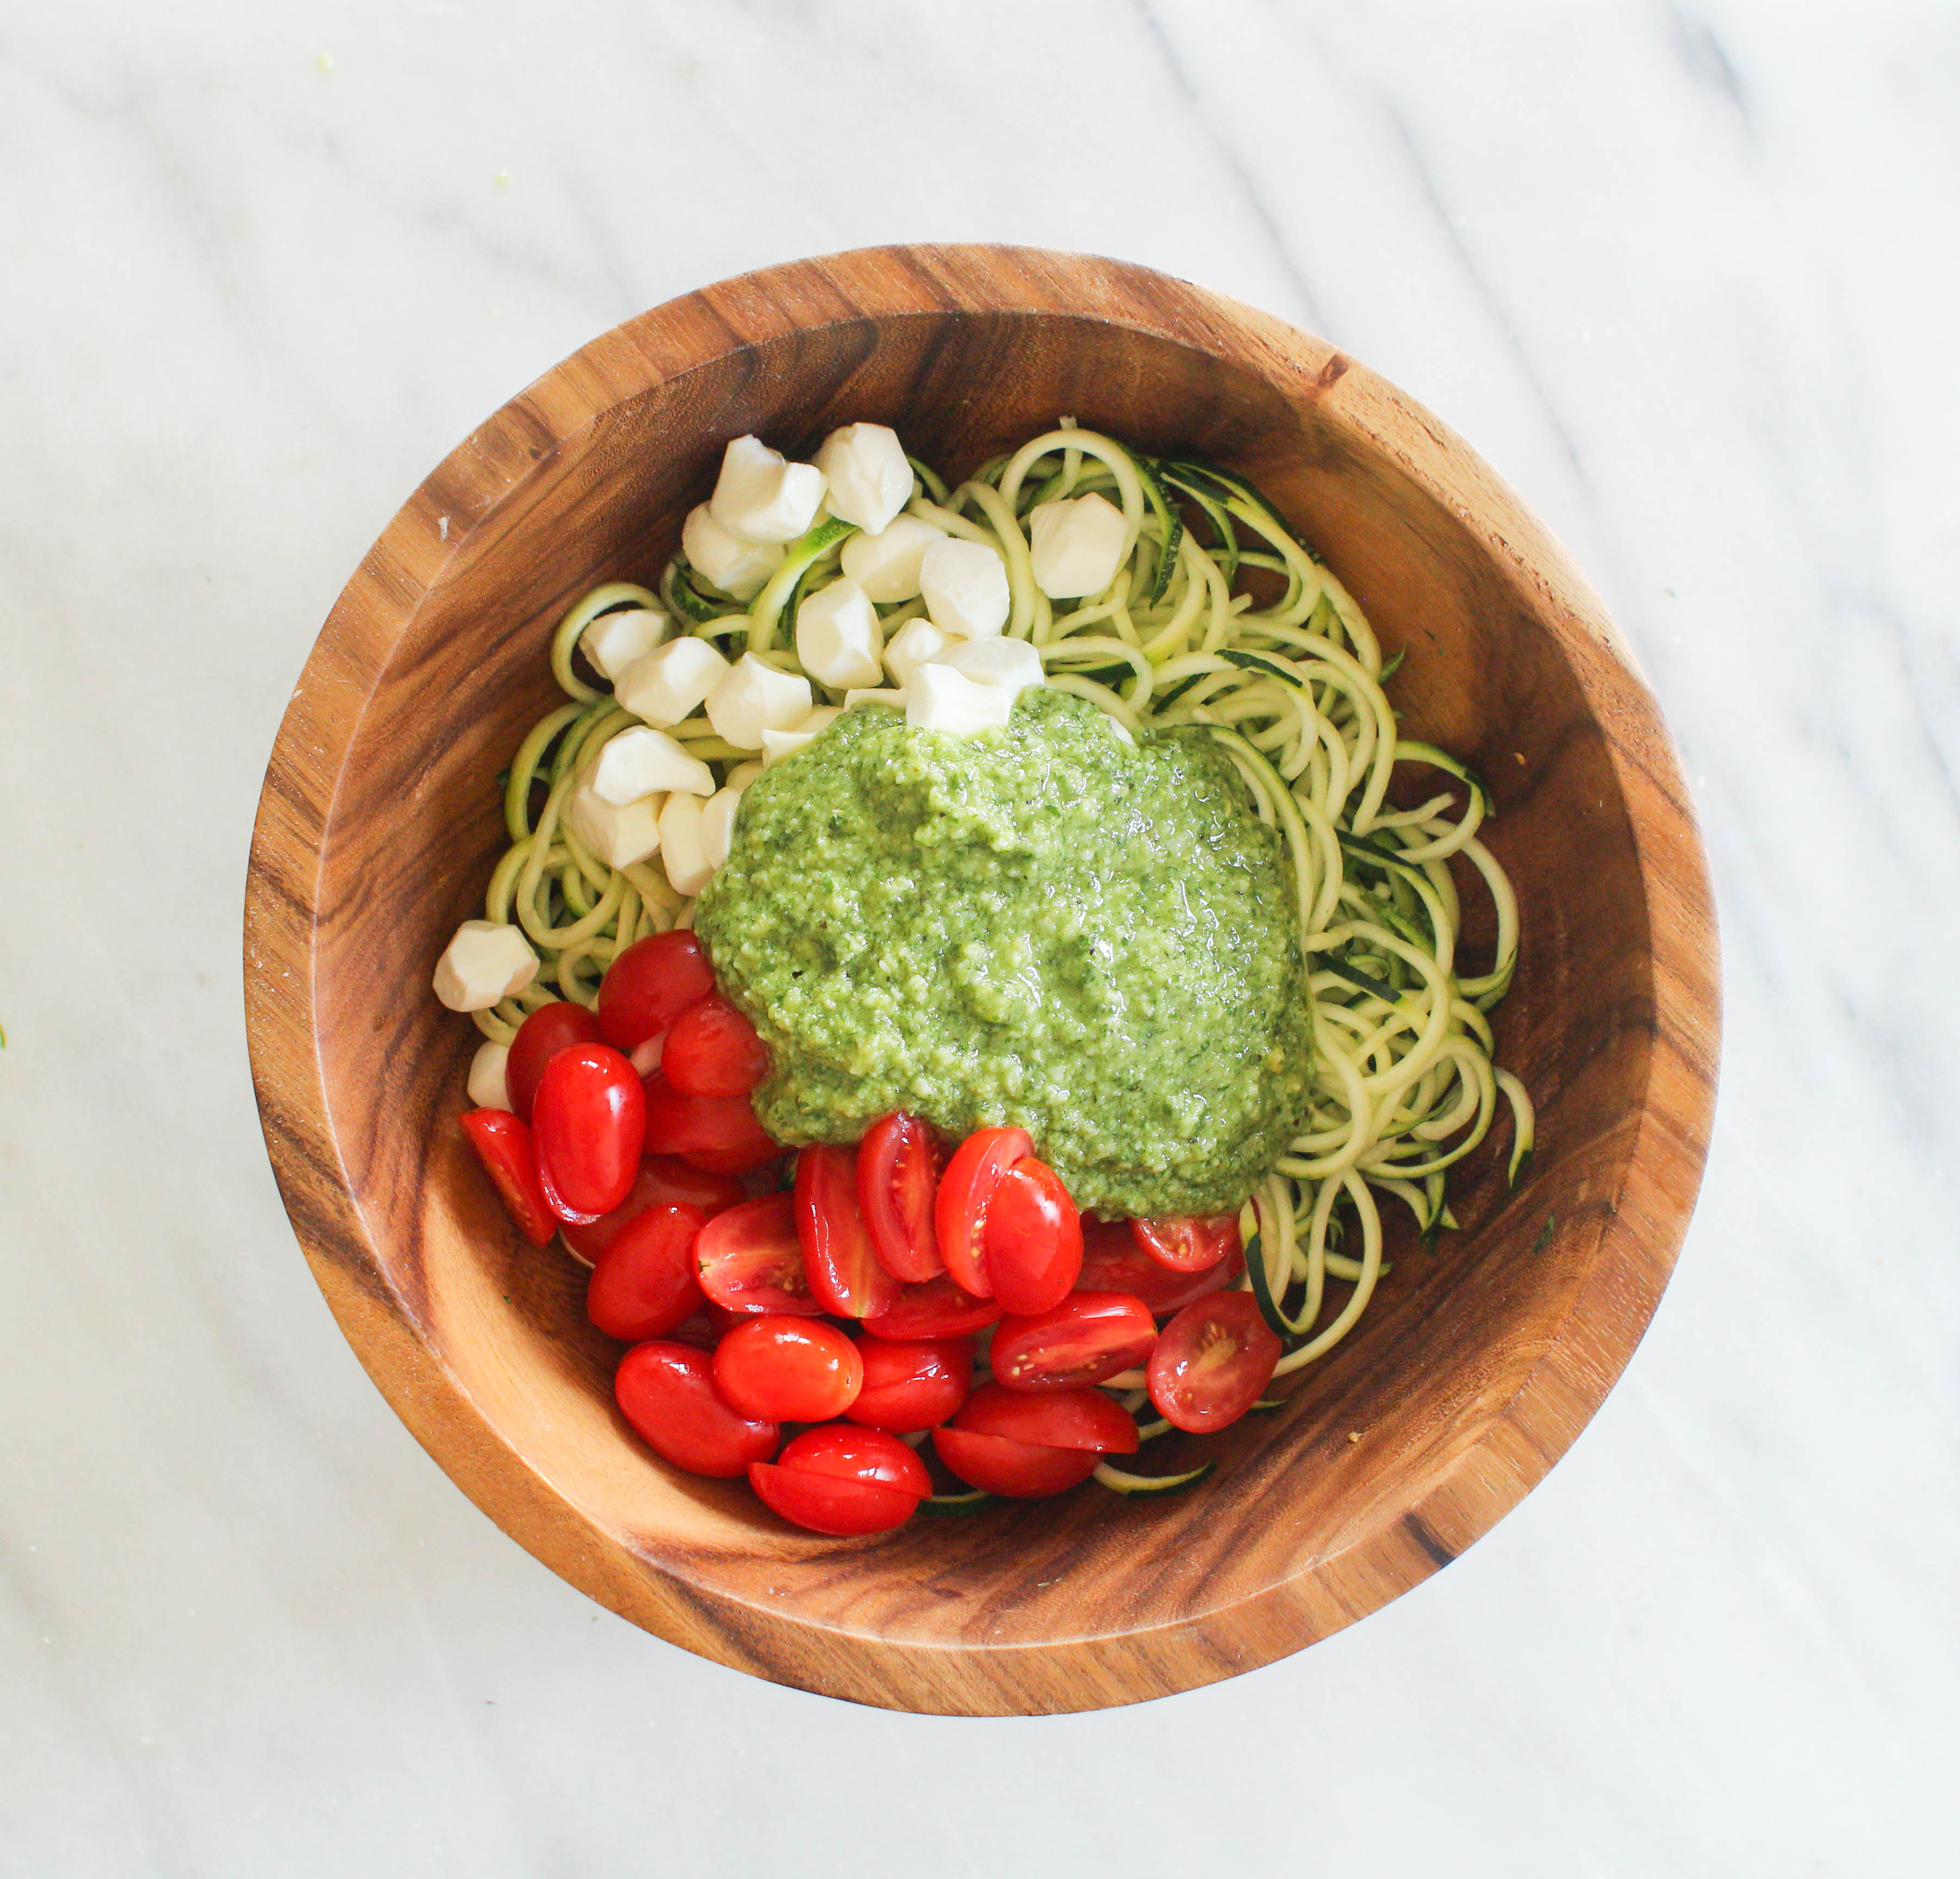  These Pesto Zucchini Noodles are a light and summery dish that doesn’t require a stove top or oven! Simply whip together a fresh basil pesto and toss zucchini noodles with cherry tomatoes and mozzarella pearls.